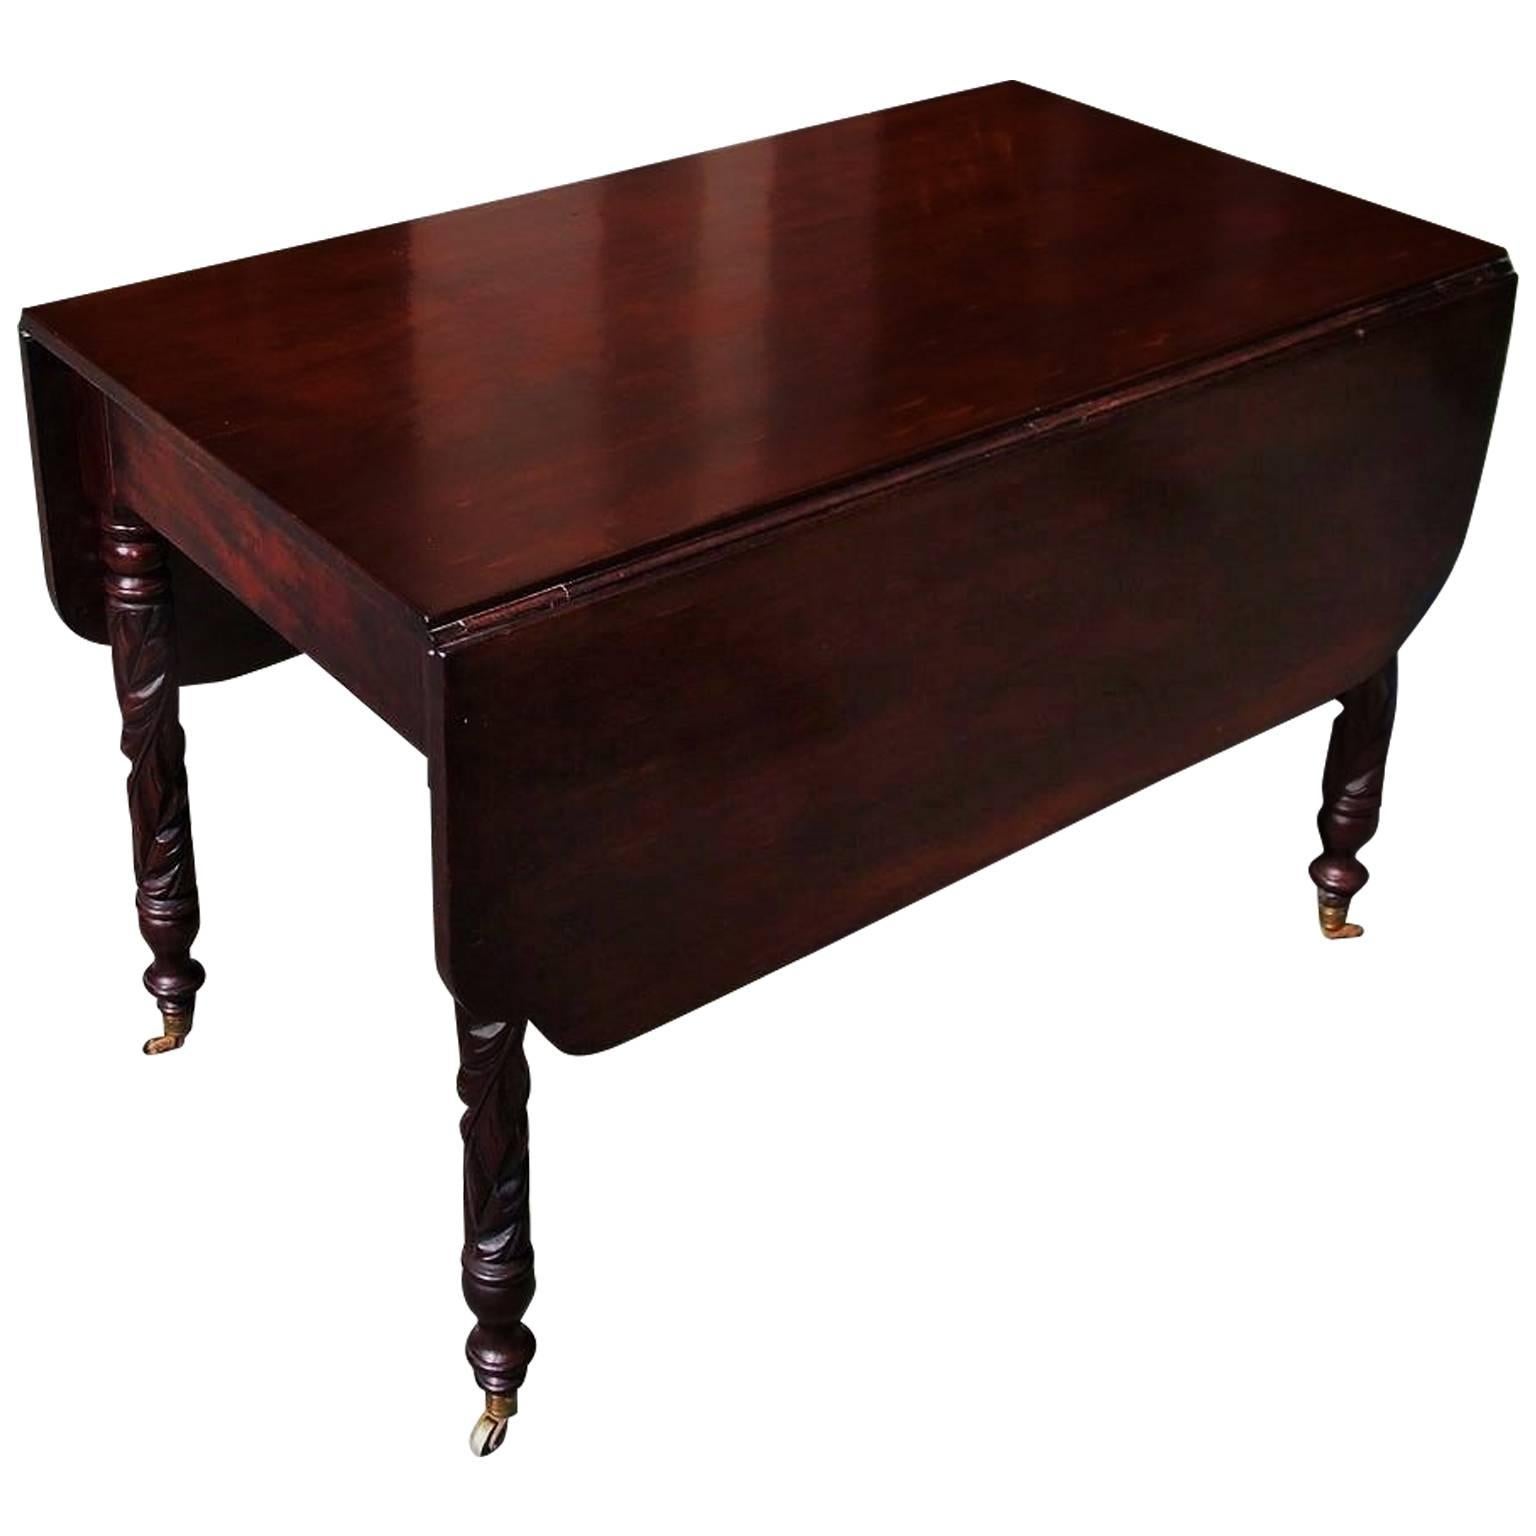 American Sheraton Cherry Acanthus Carved Drop-Leaf Table on Casters, Circa 1820